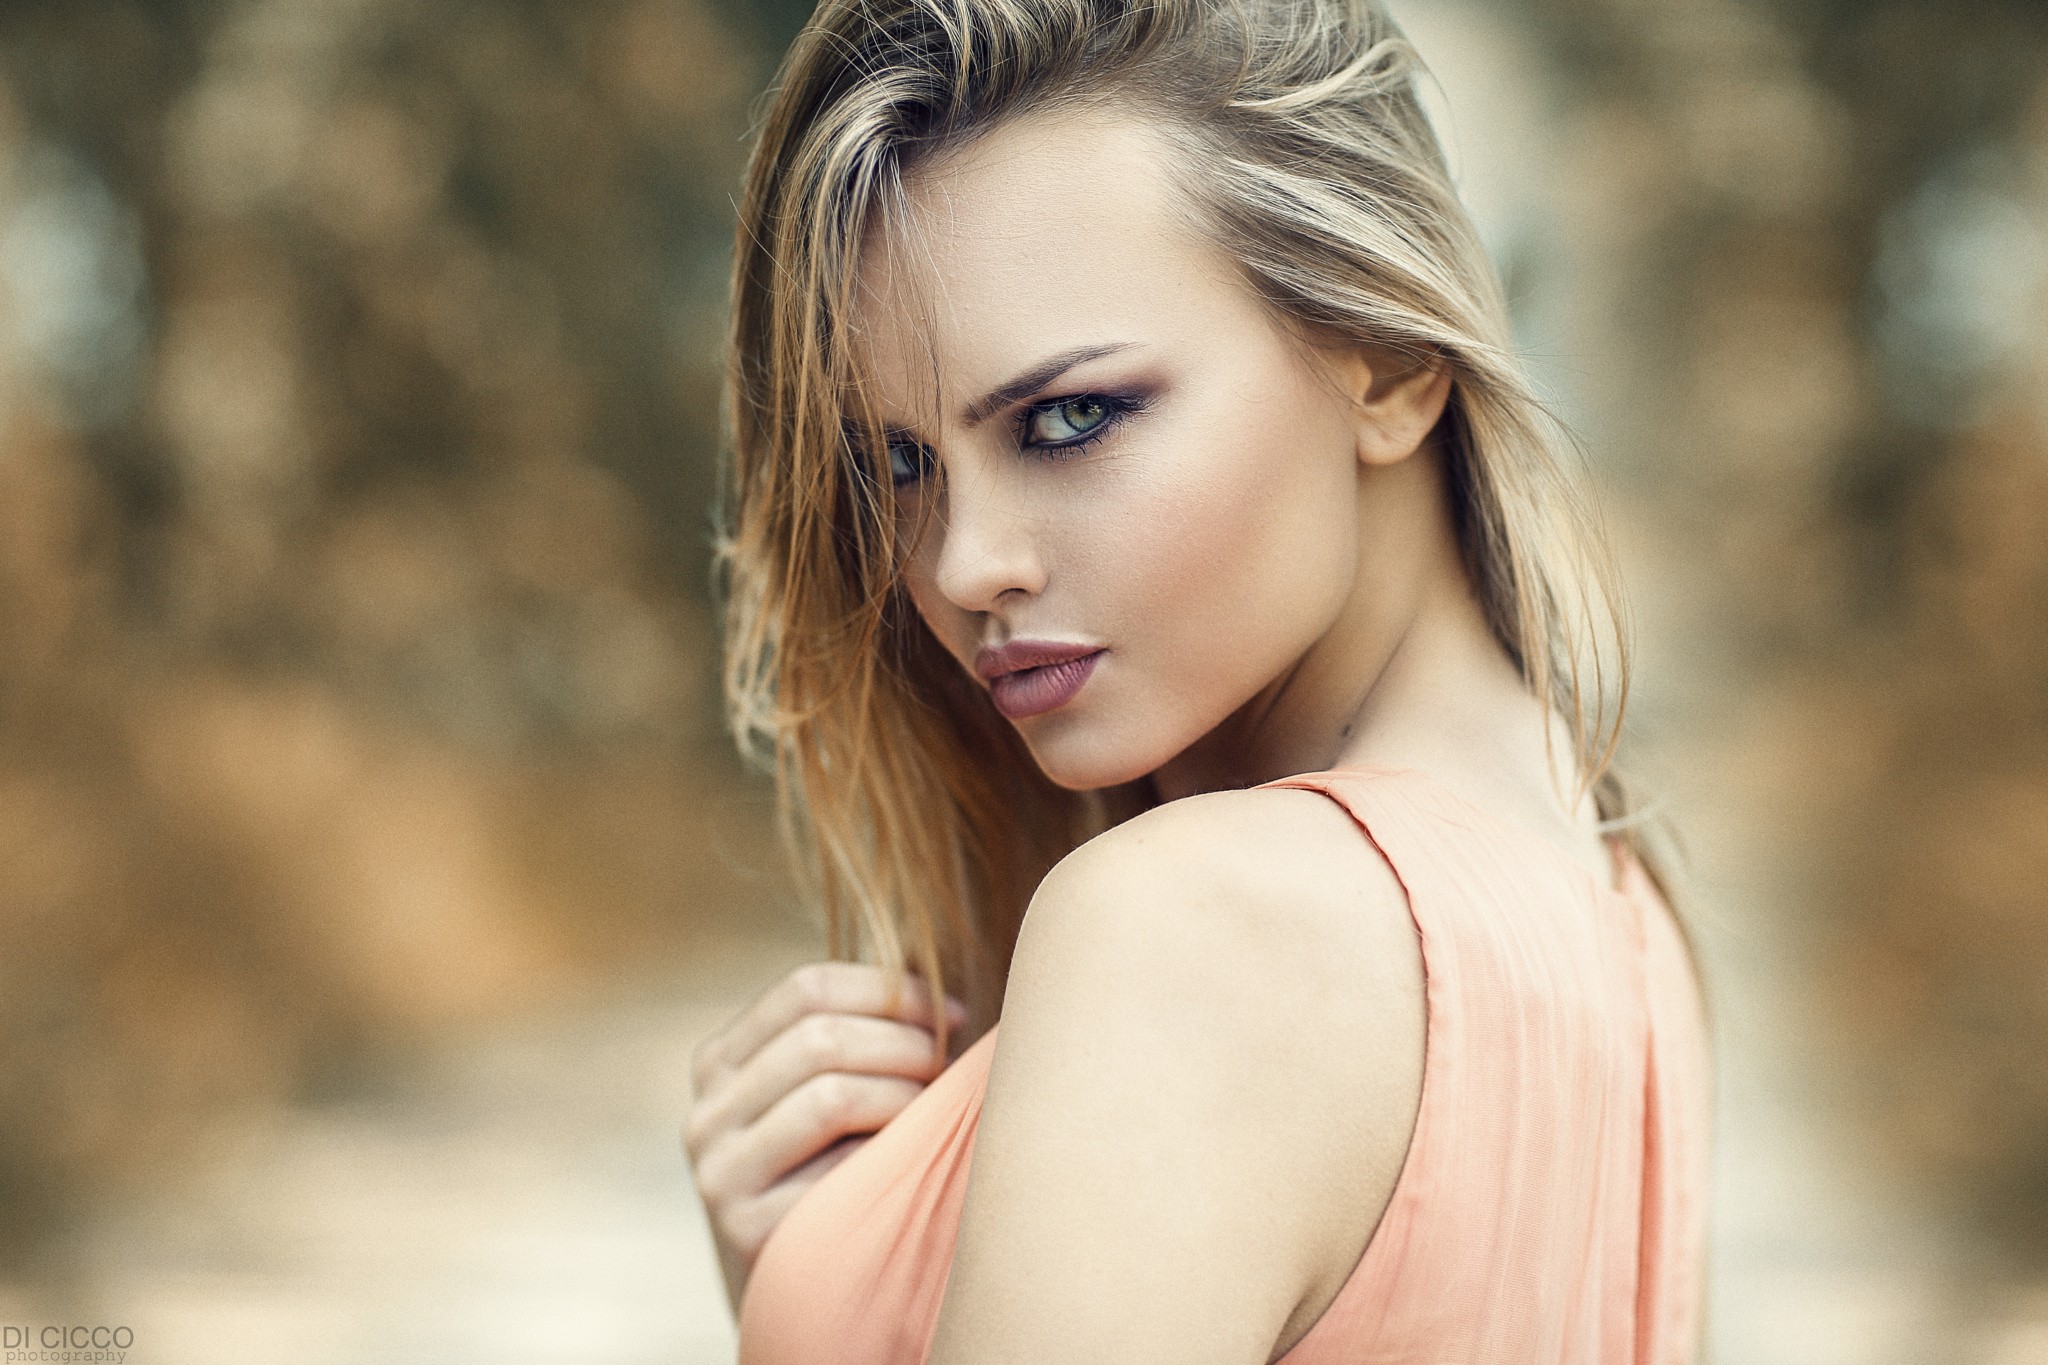 People 2048x1365 women face portrait blonde Alessandro Di Cicco model makeup looking at viewer closeup women outdoors lipstick eyeliner hair over one eye long hair